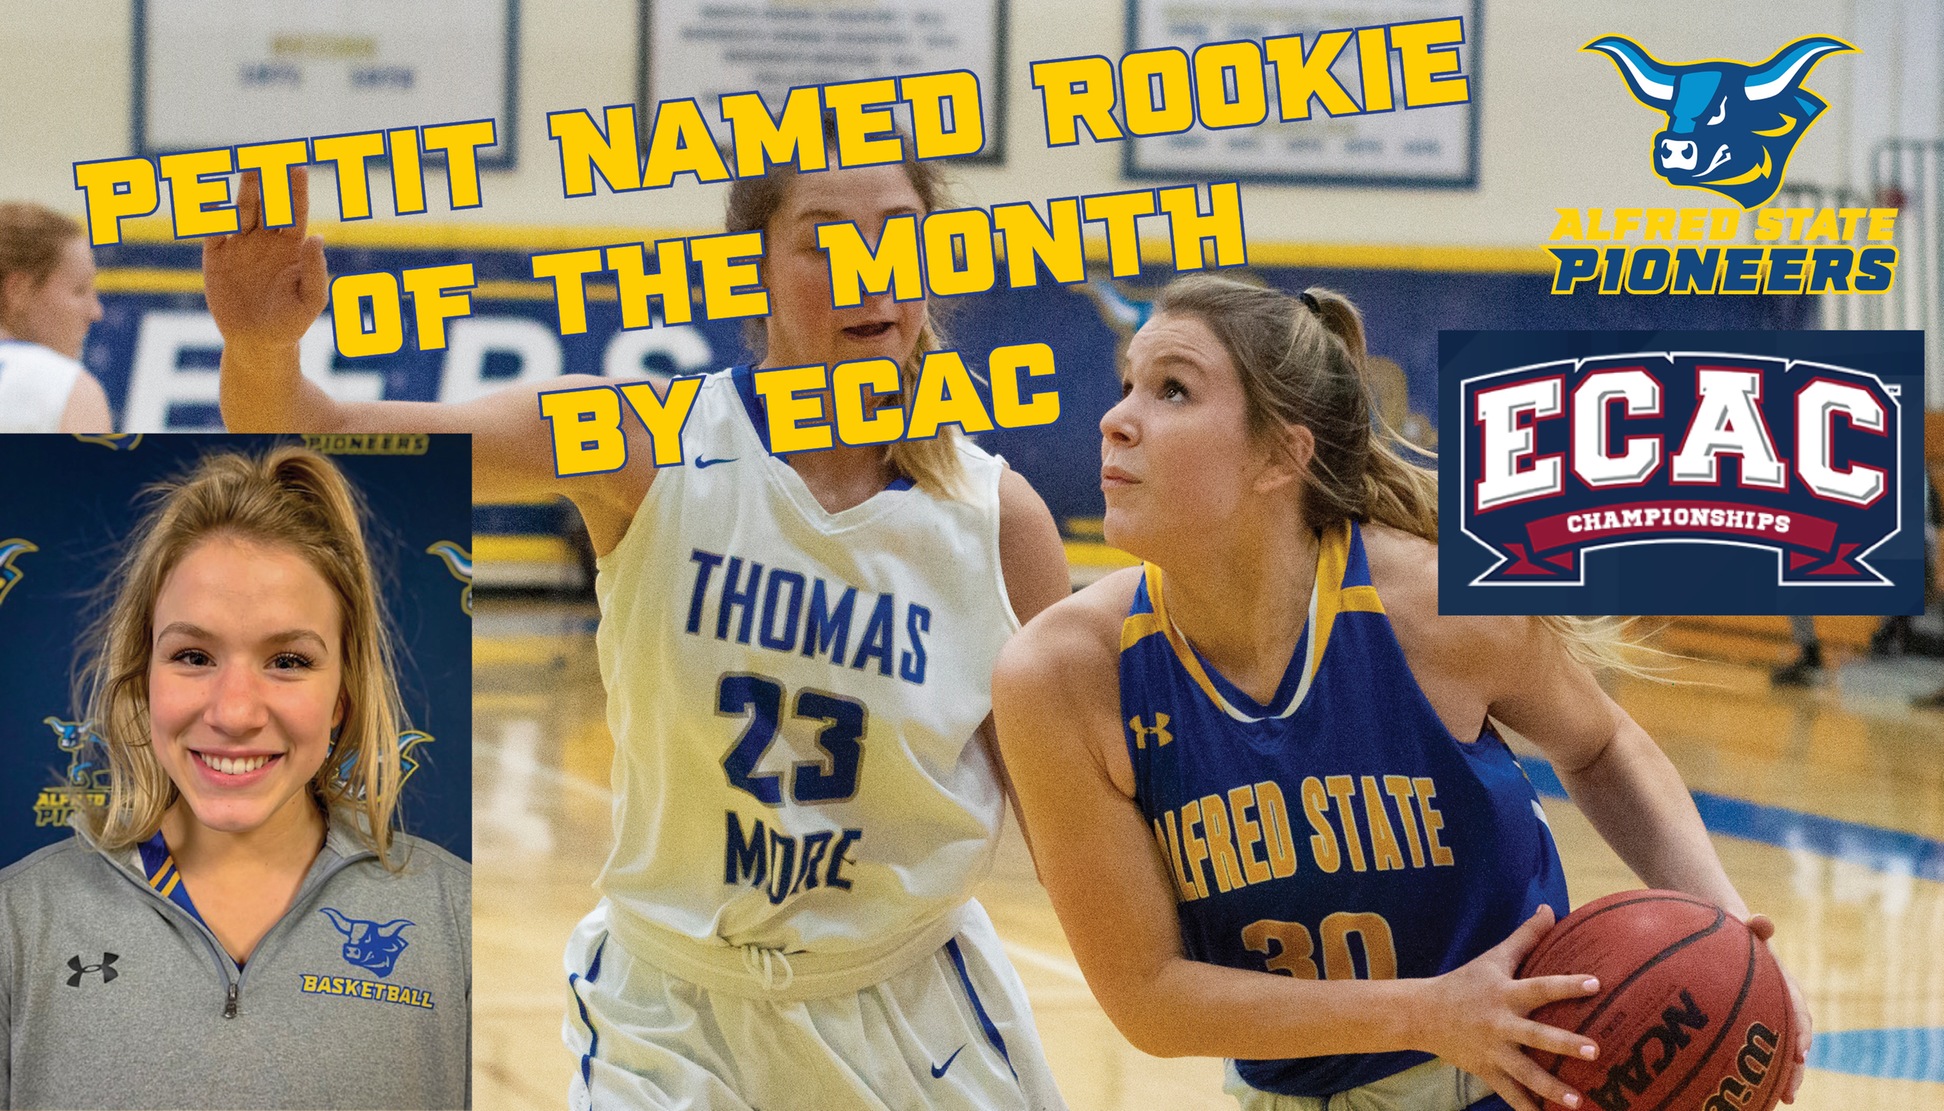 Pettit Named ECAC Rookie of the Month